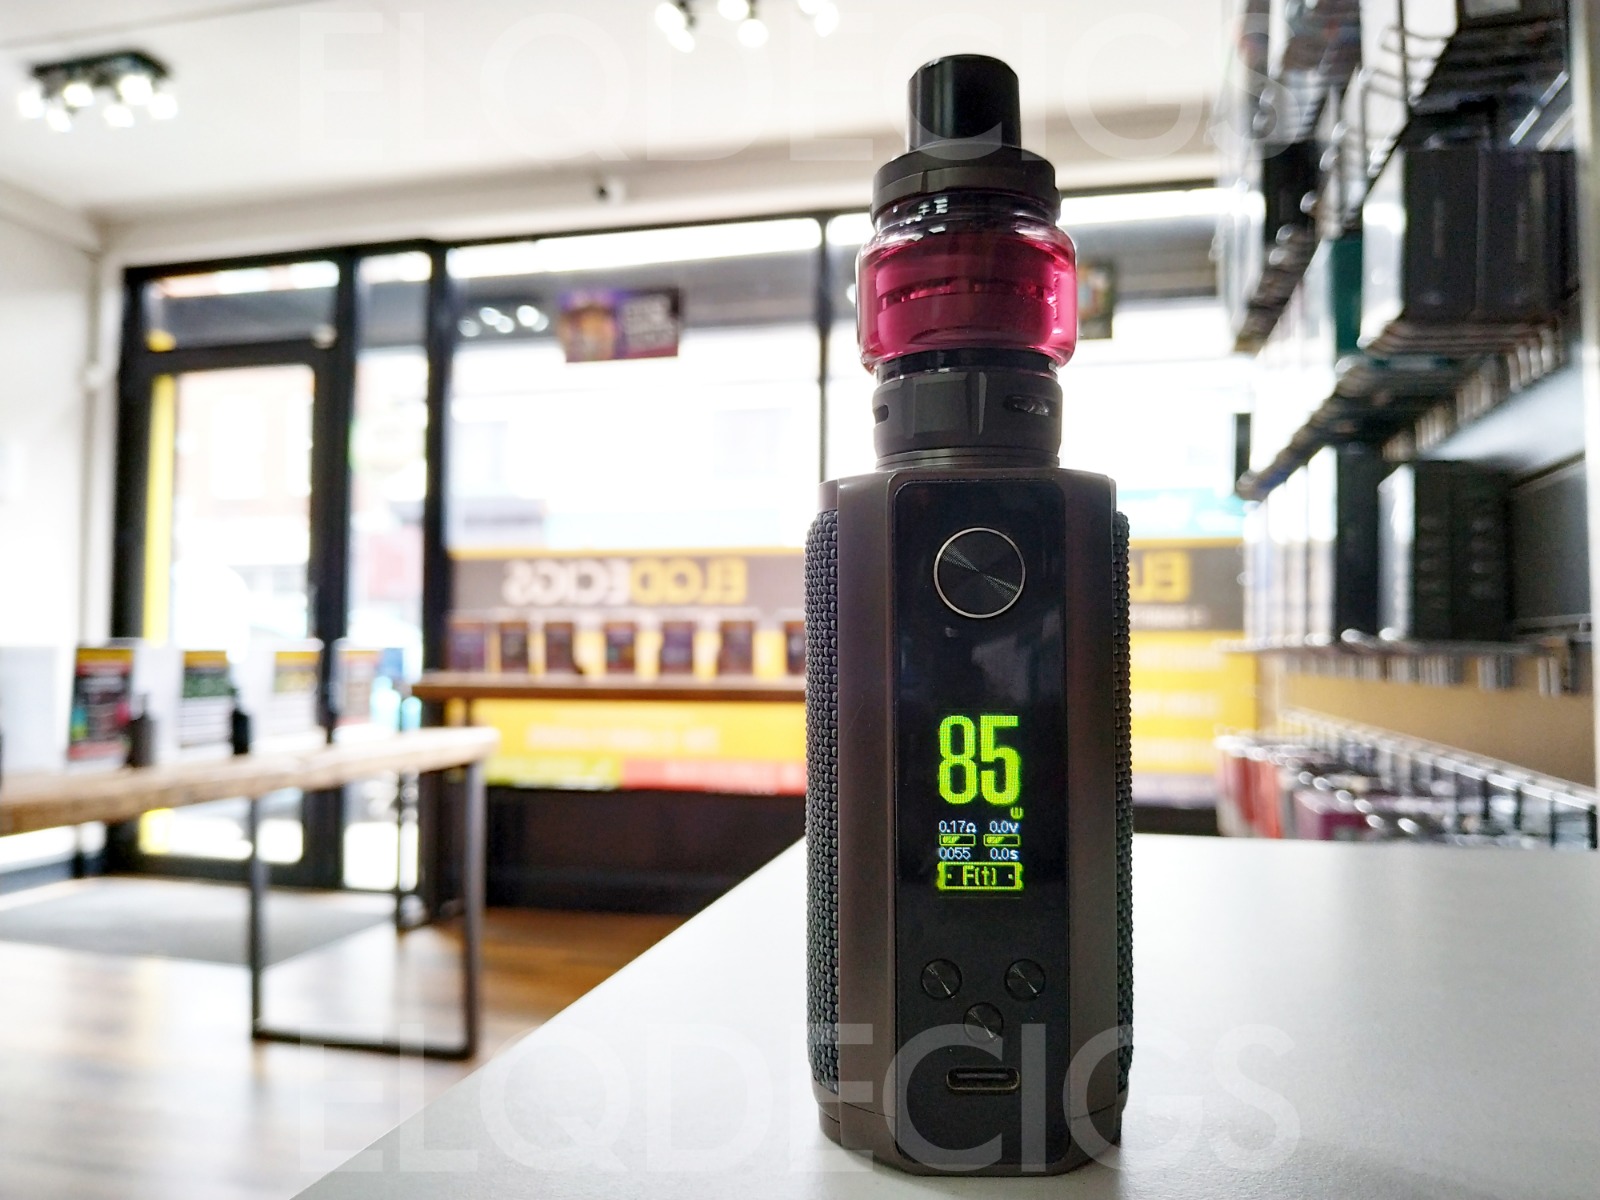 Read More About The Article Review: Vaporesso Target 200 Kit